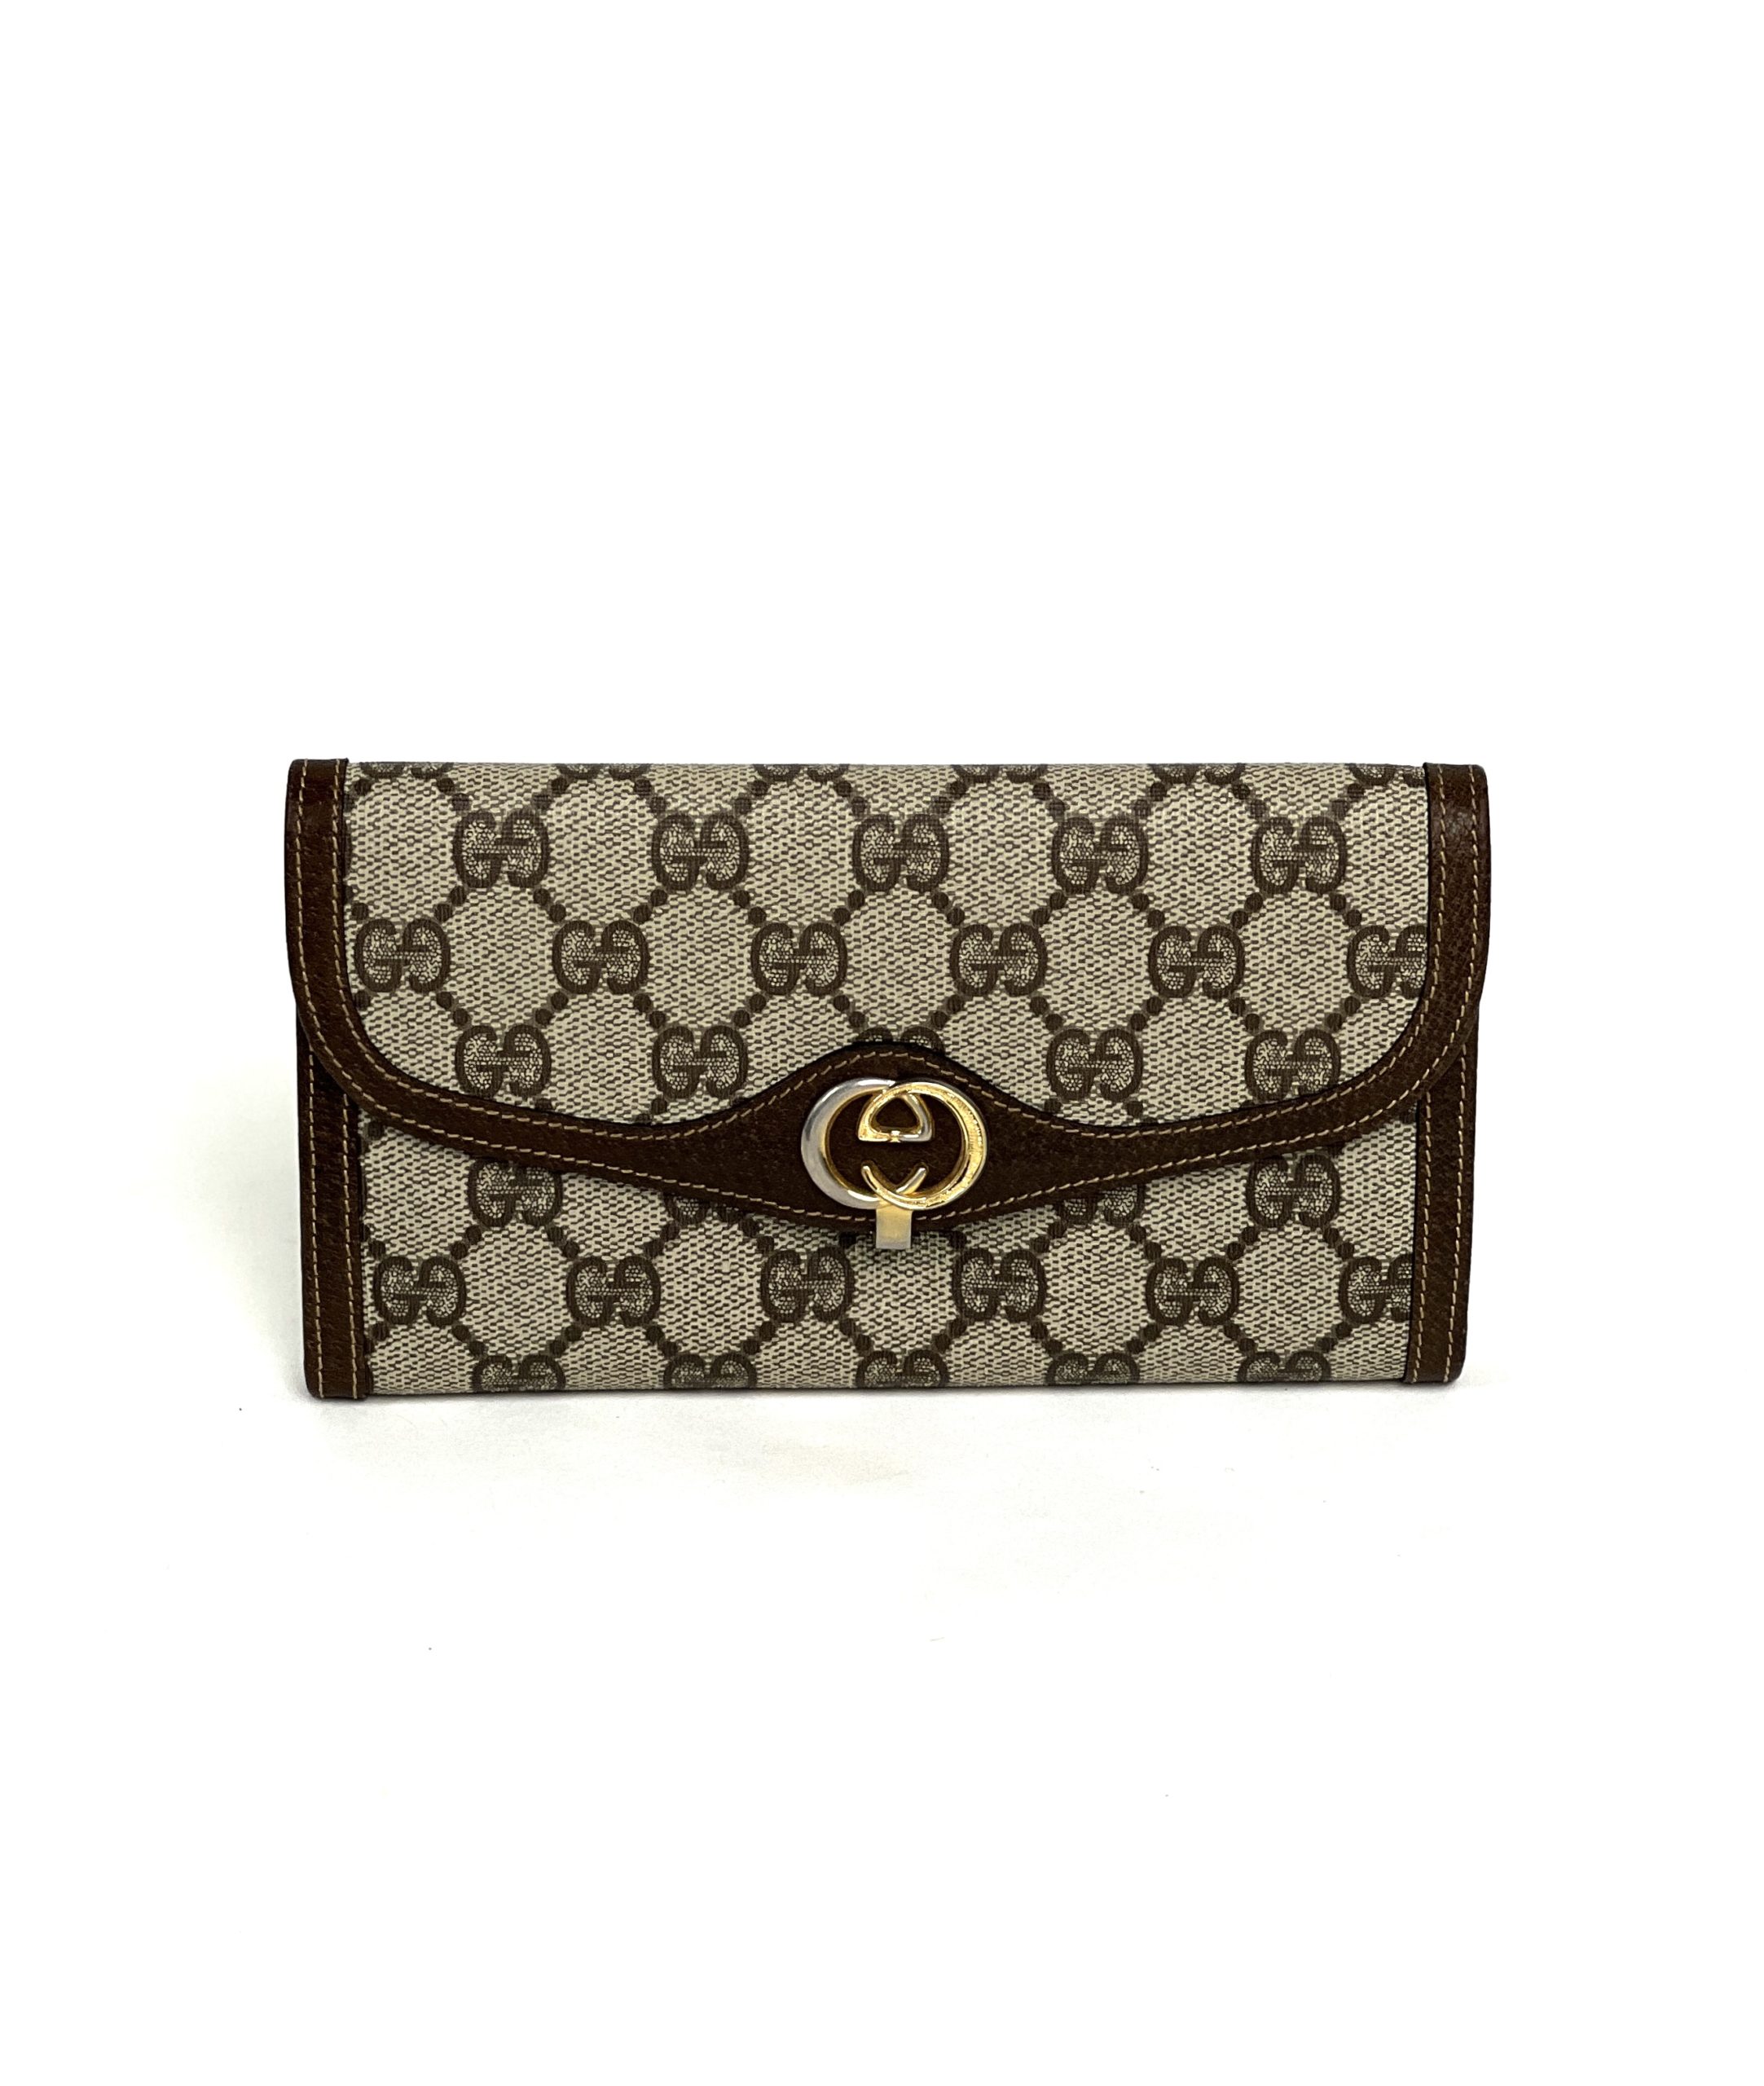 Gucci Vintage Light Pink Limited Edition GG Marmont Floral Compact Wallet, Best Price and Reviews